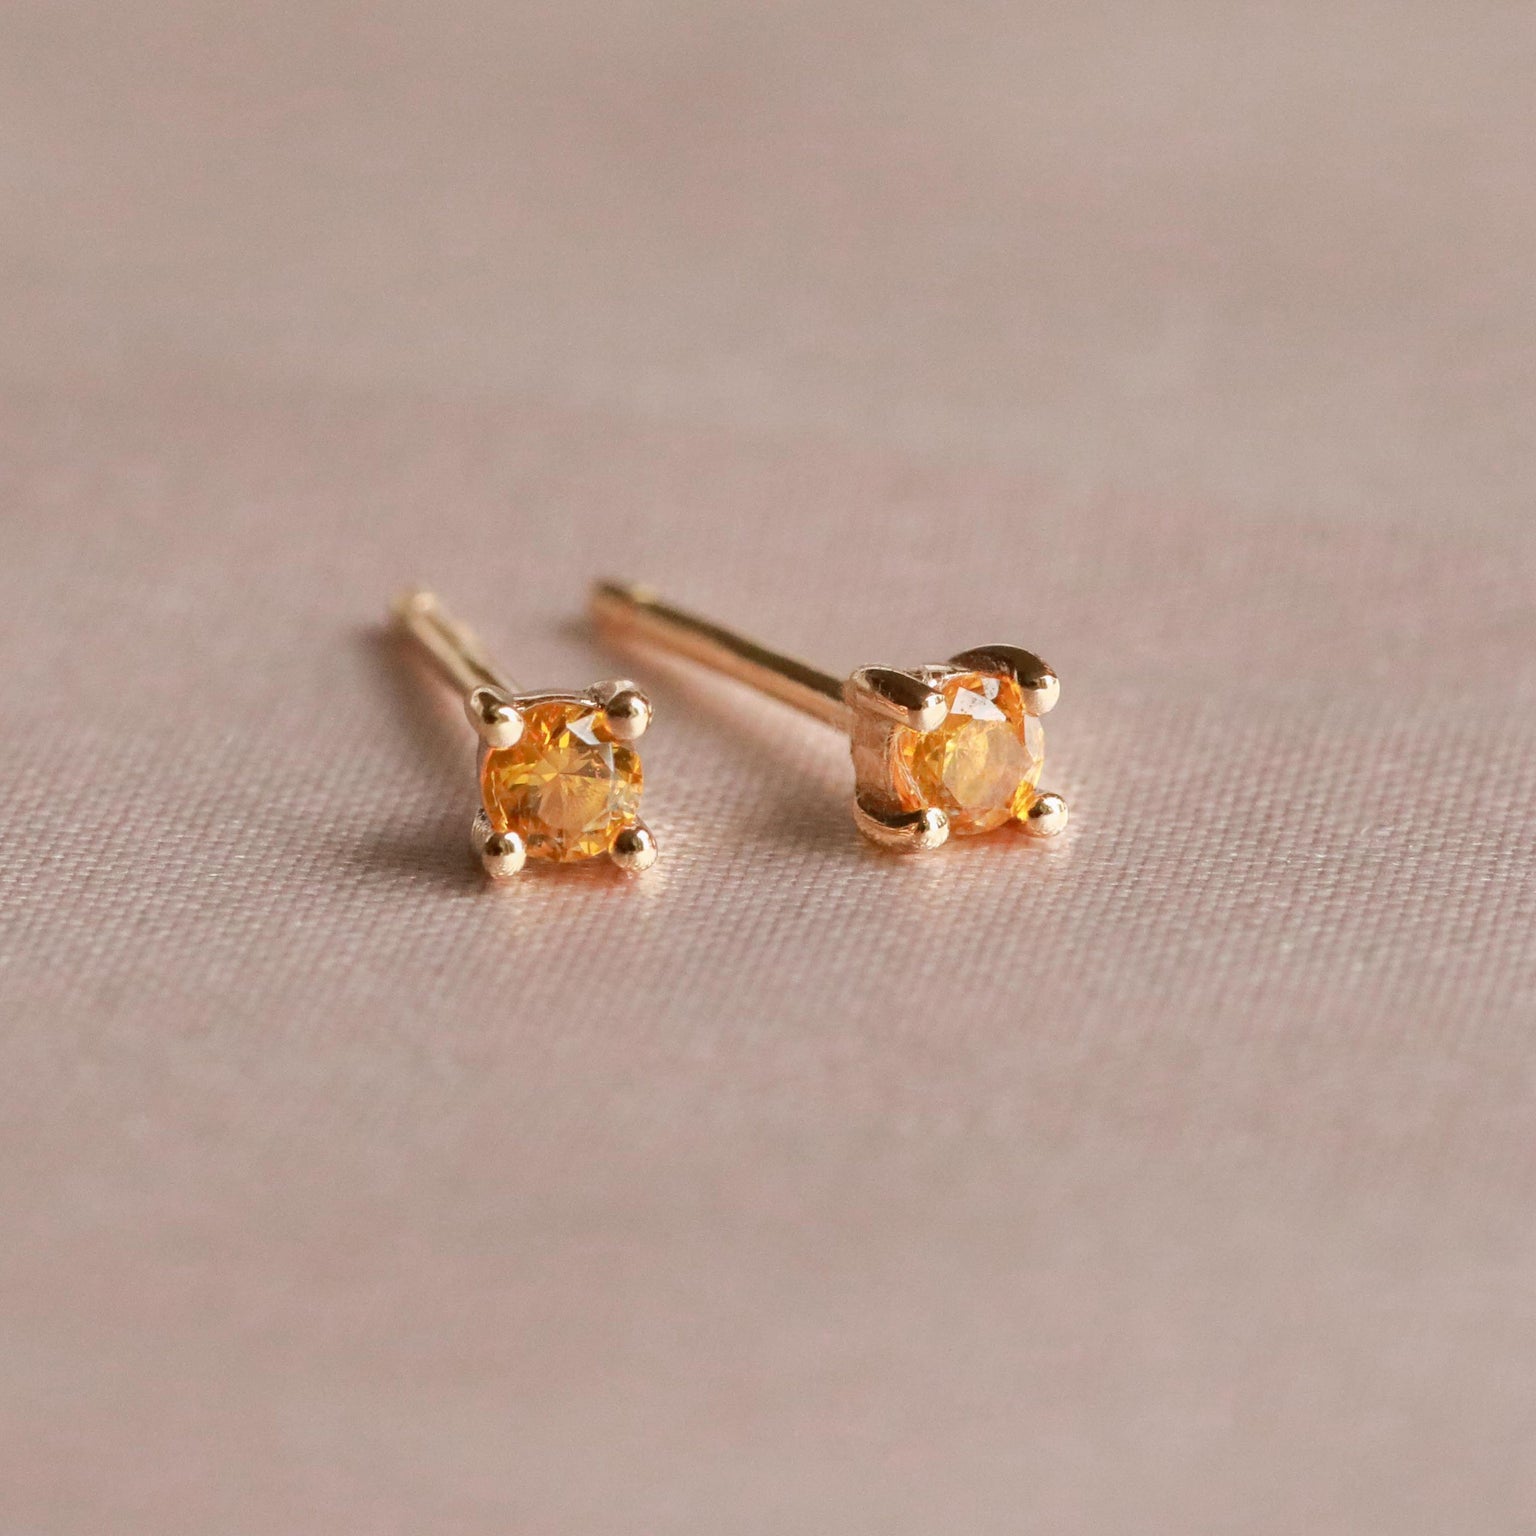 November Birthstone Stud Earrings in Gold with Citrine CZ